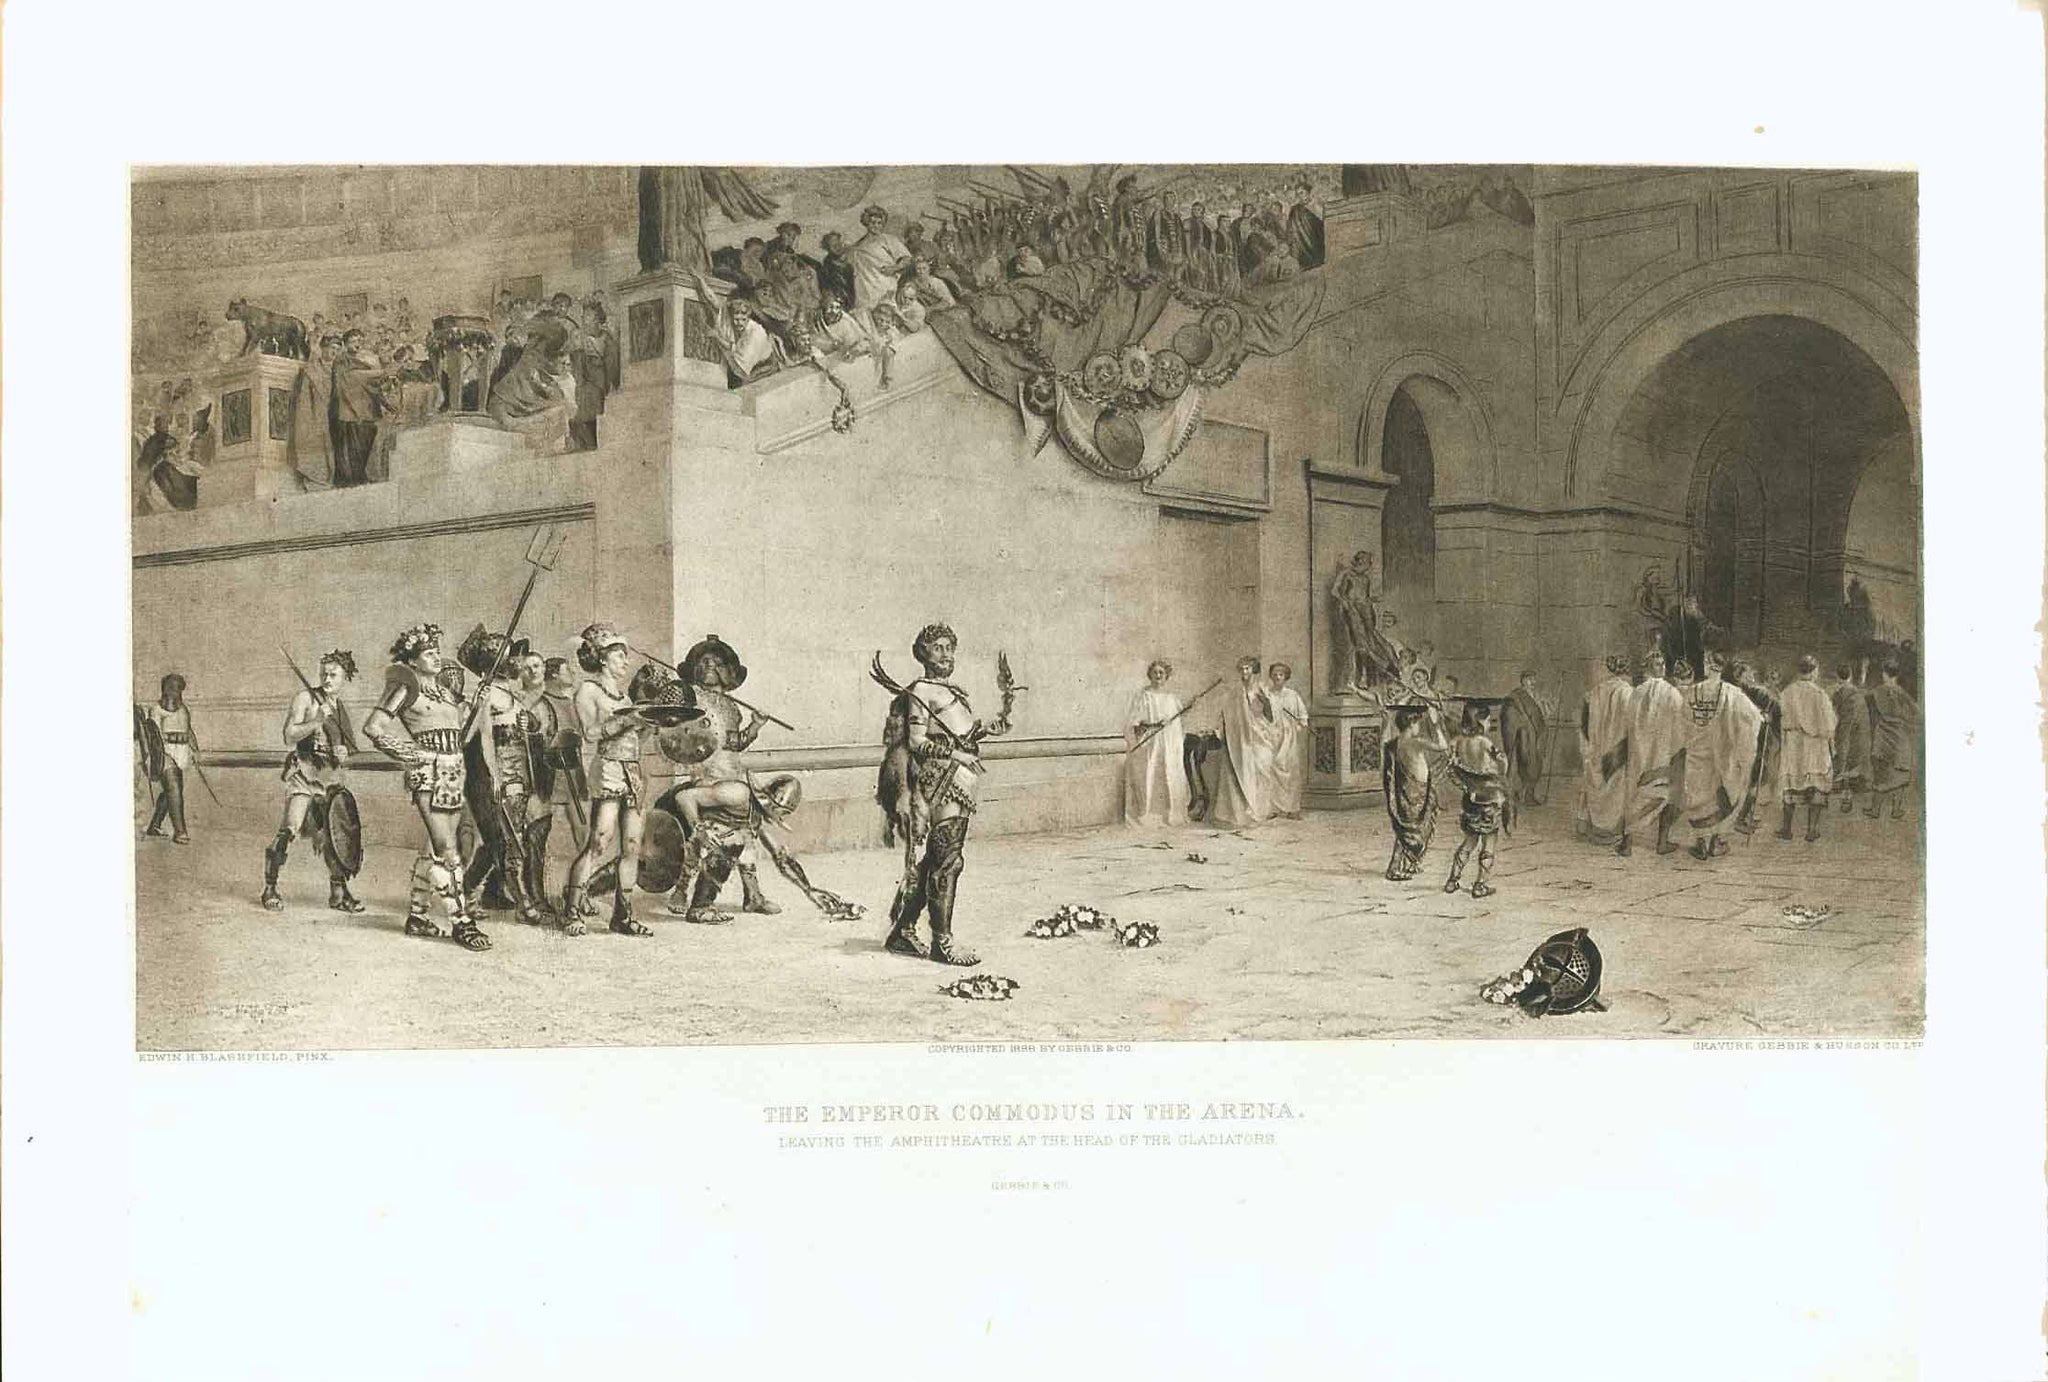 "The Emperor Commodus in the Arena - Leaving the Amphitheatre at the Head of the Gladiators"  Sepia-toned lithograph printed from a zinc plate (photo gravure)  After the painting by Edwin Howard Blashfield (1848-1936)  Publlsher: Gebbie & Husson  London, 1894  Original antique print 